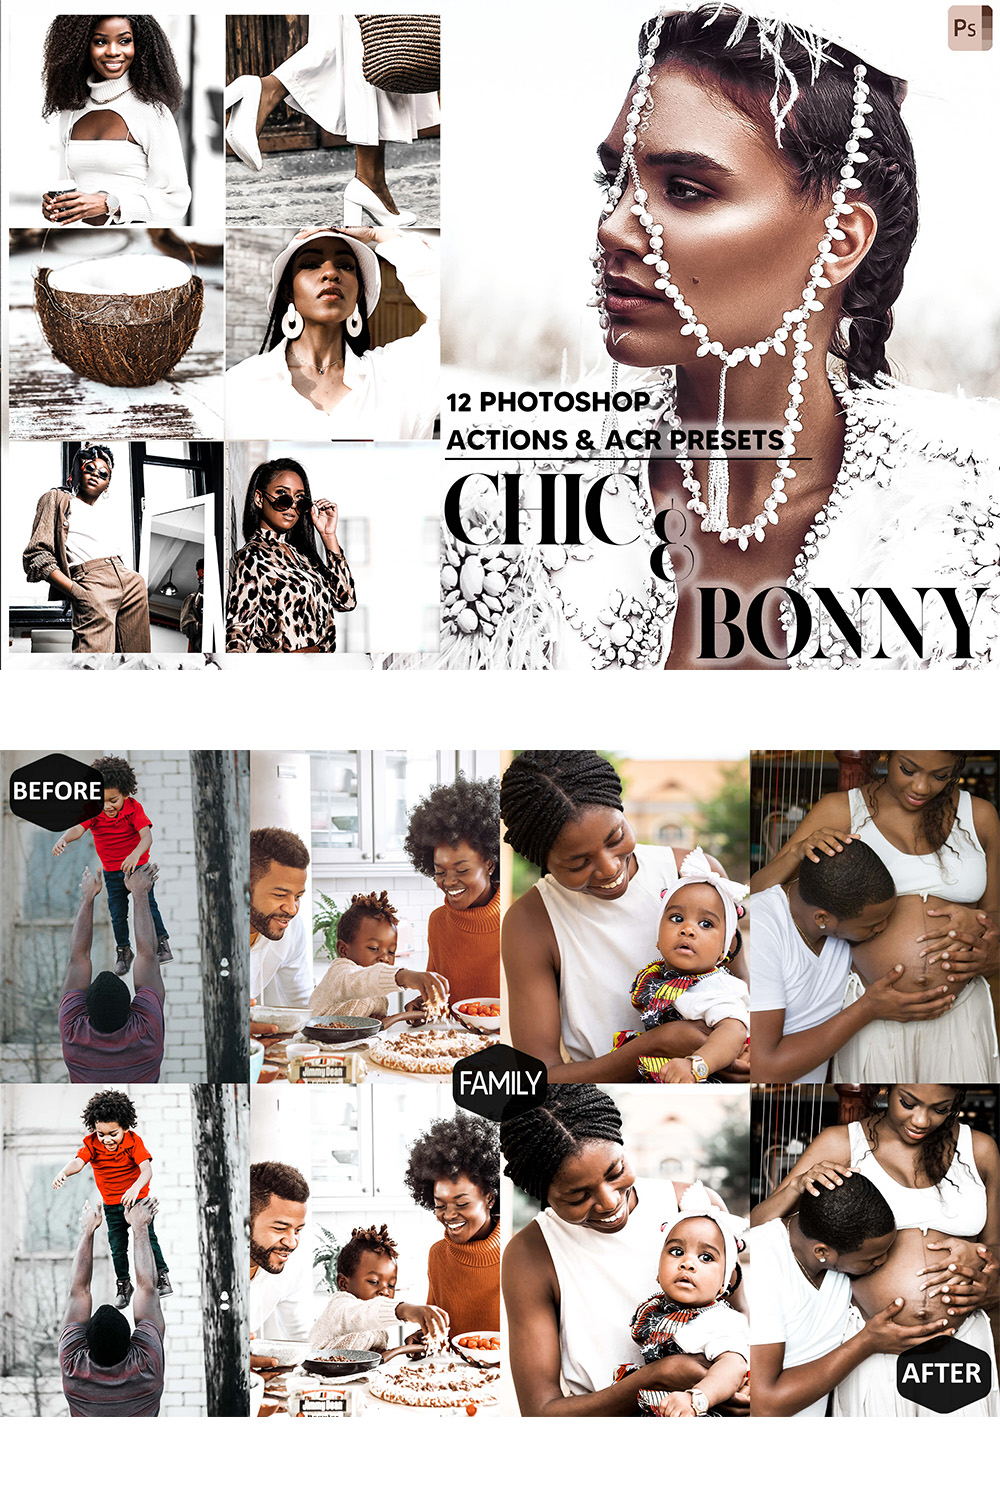 12 Photoshop Actions, Chic & Bonny Ps Action, Bright ACR Preset, Dark Skin Ps Filter, Atn Portrait And Lifestyle Theme For Instagram, Blogger pinterest preview image.